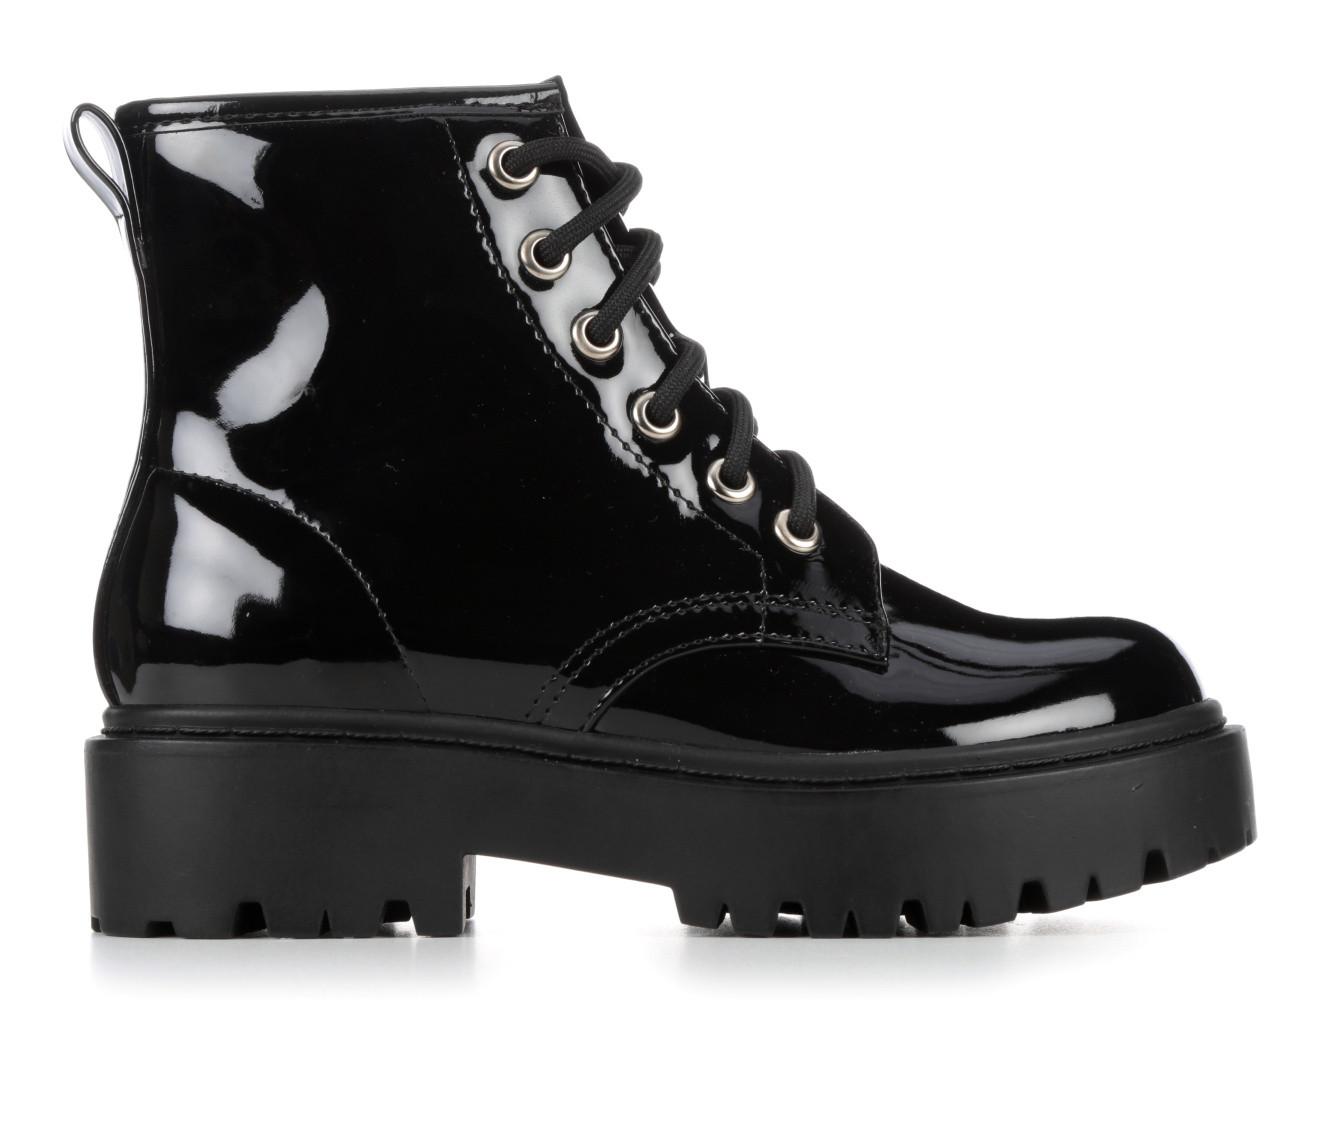 Kids' Combat Boots for Girls | Shoe Carnival